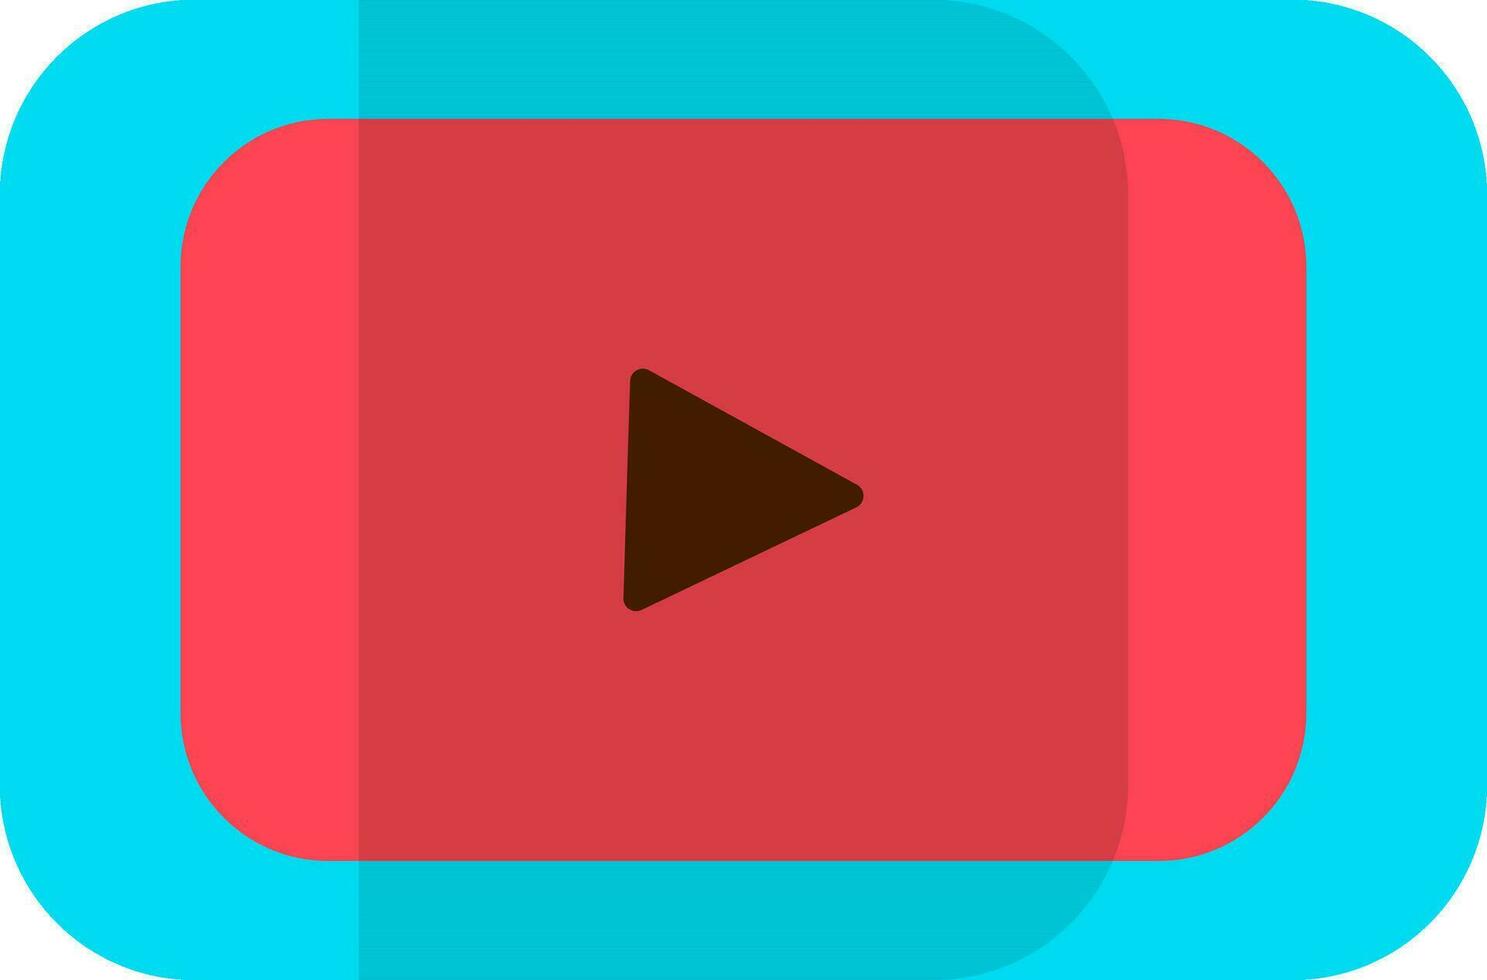 Blue and pink youtube icon in flat style. vector